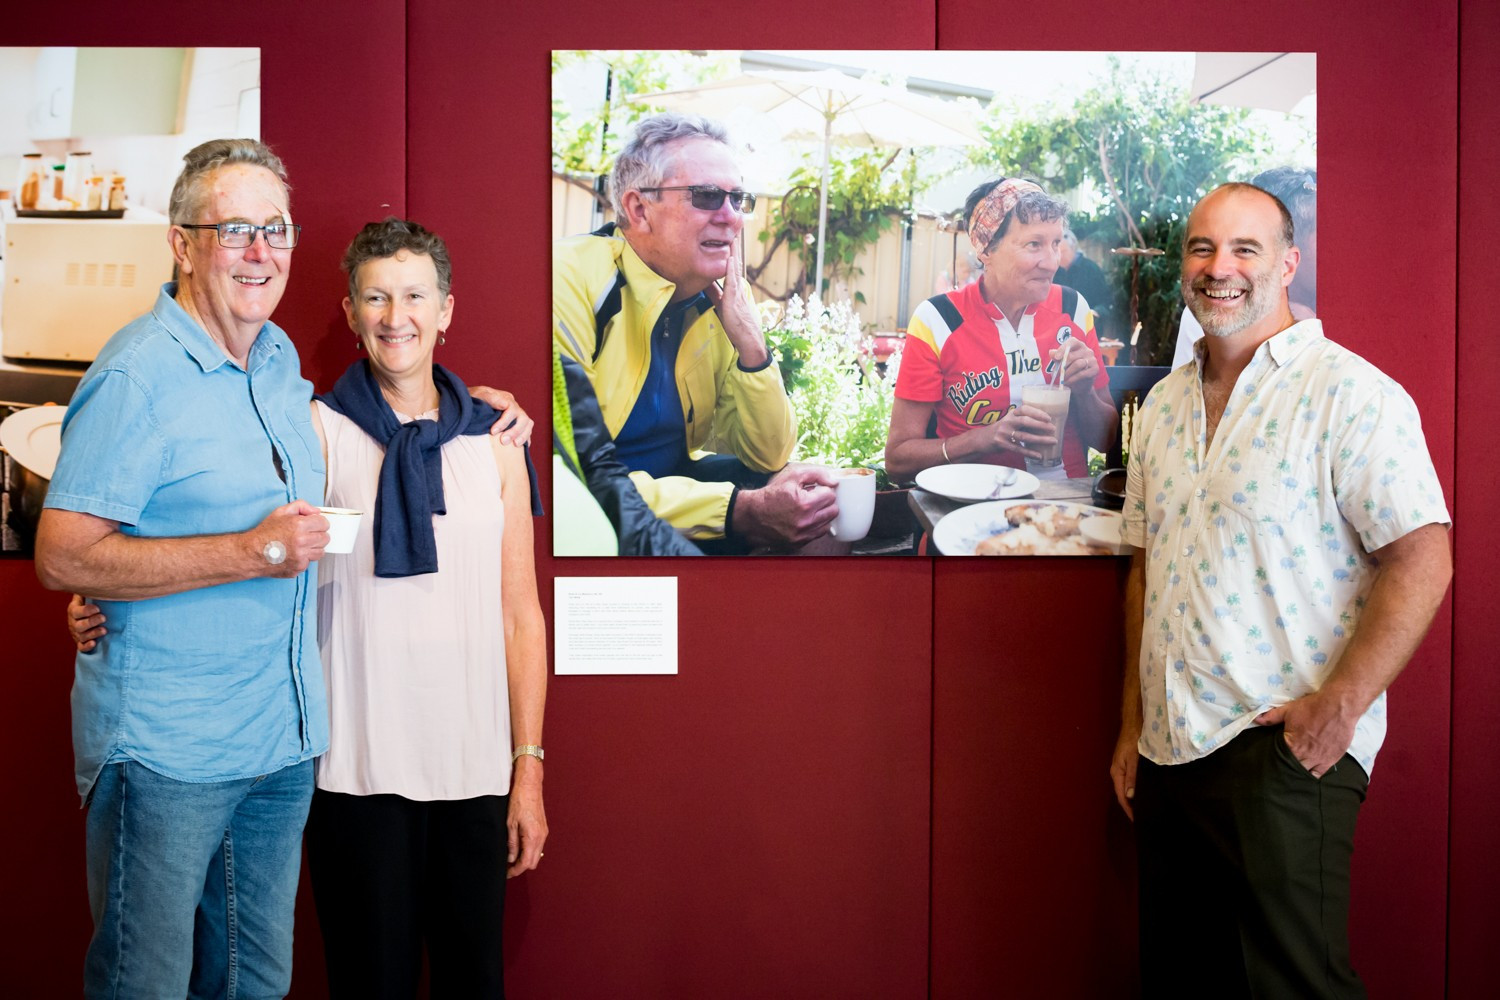 Photographer Tim White with his subjects at The Art of Ageing 2018 opening. Photo by Jodie Baker